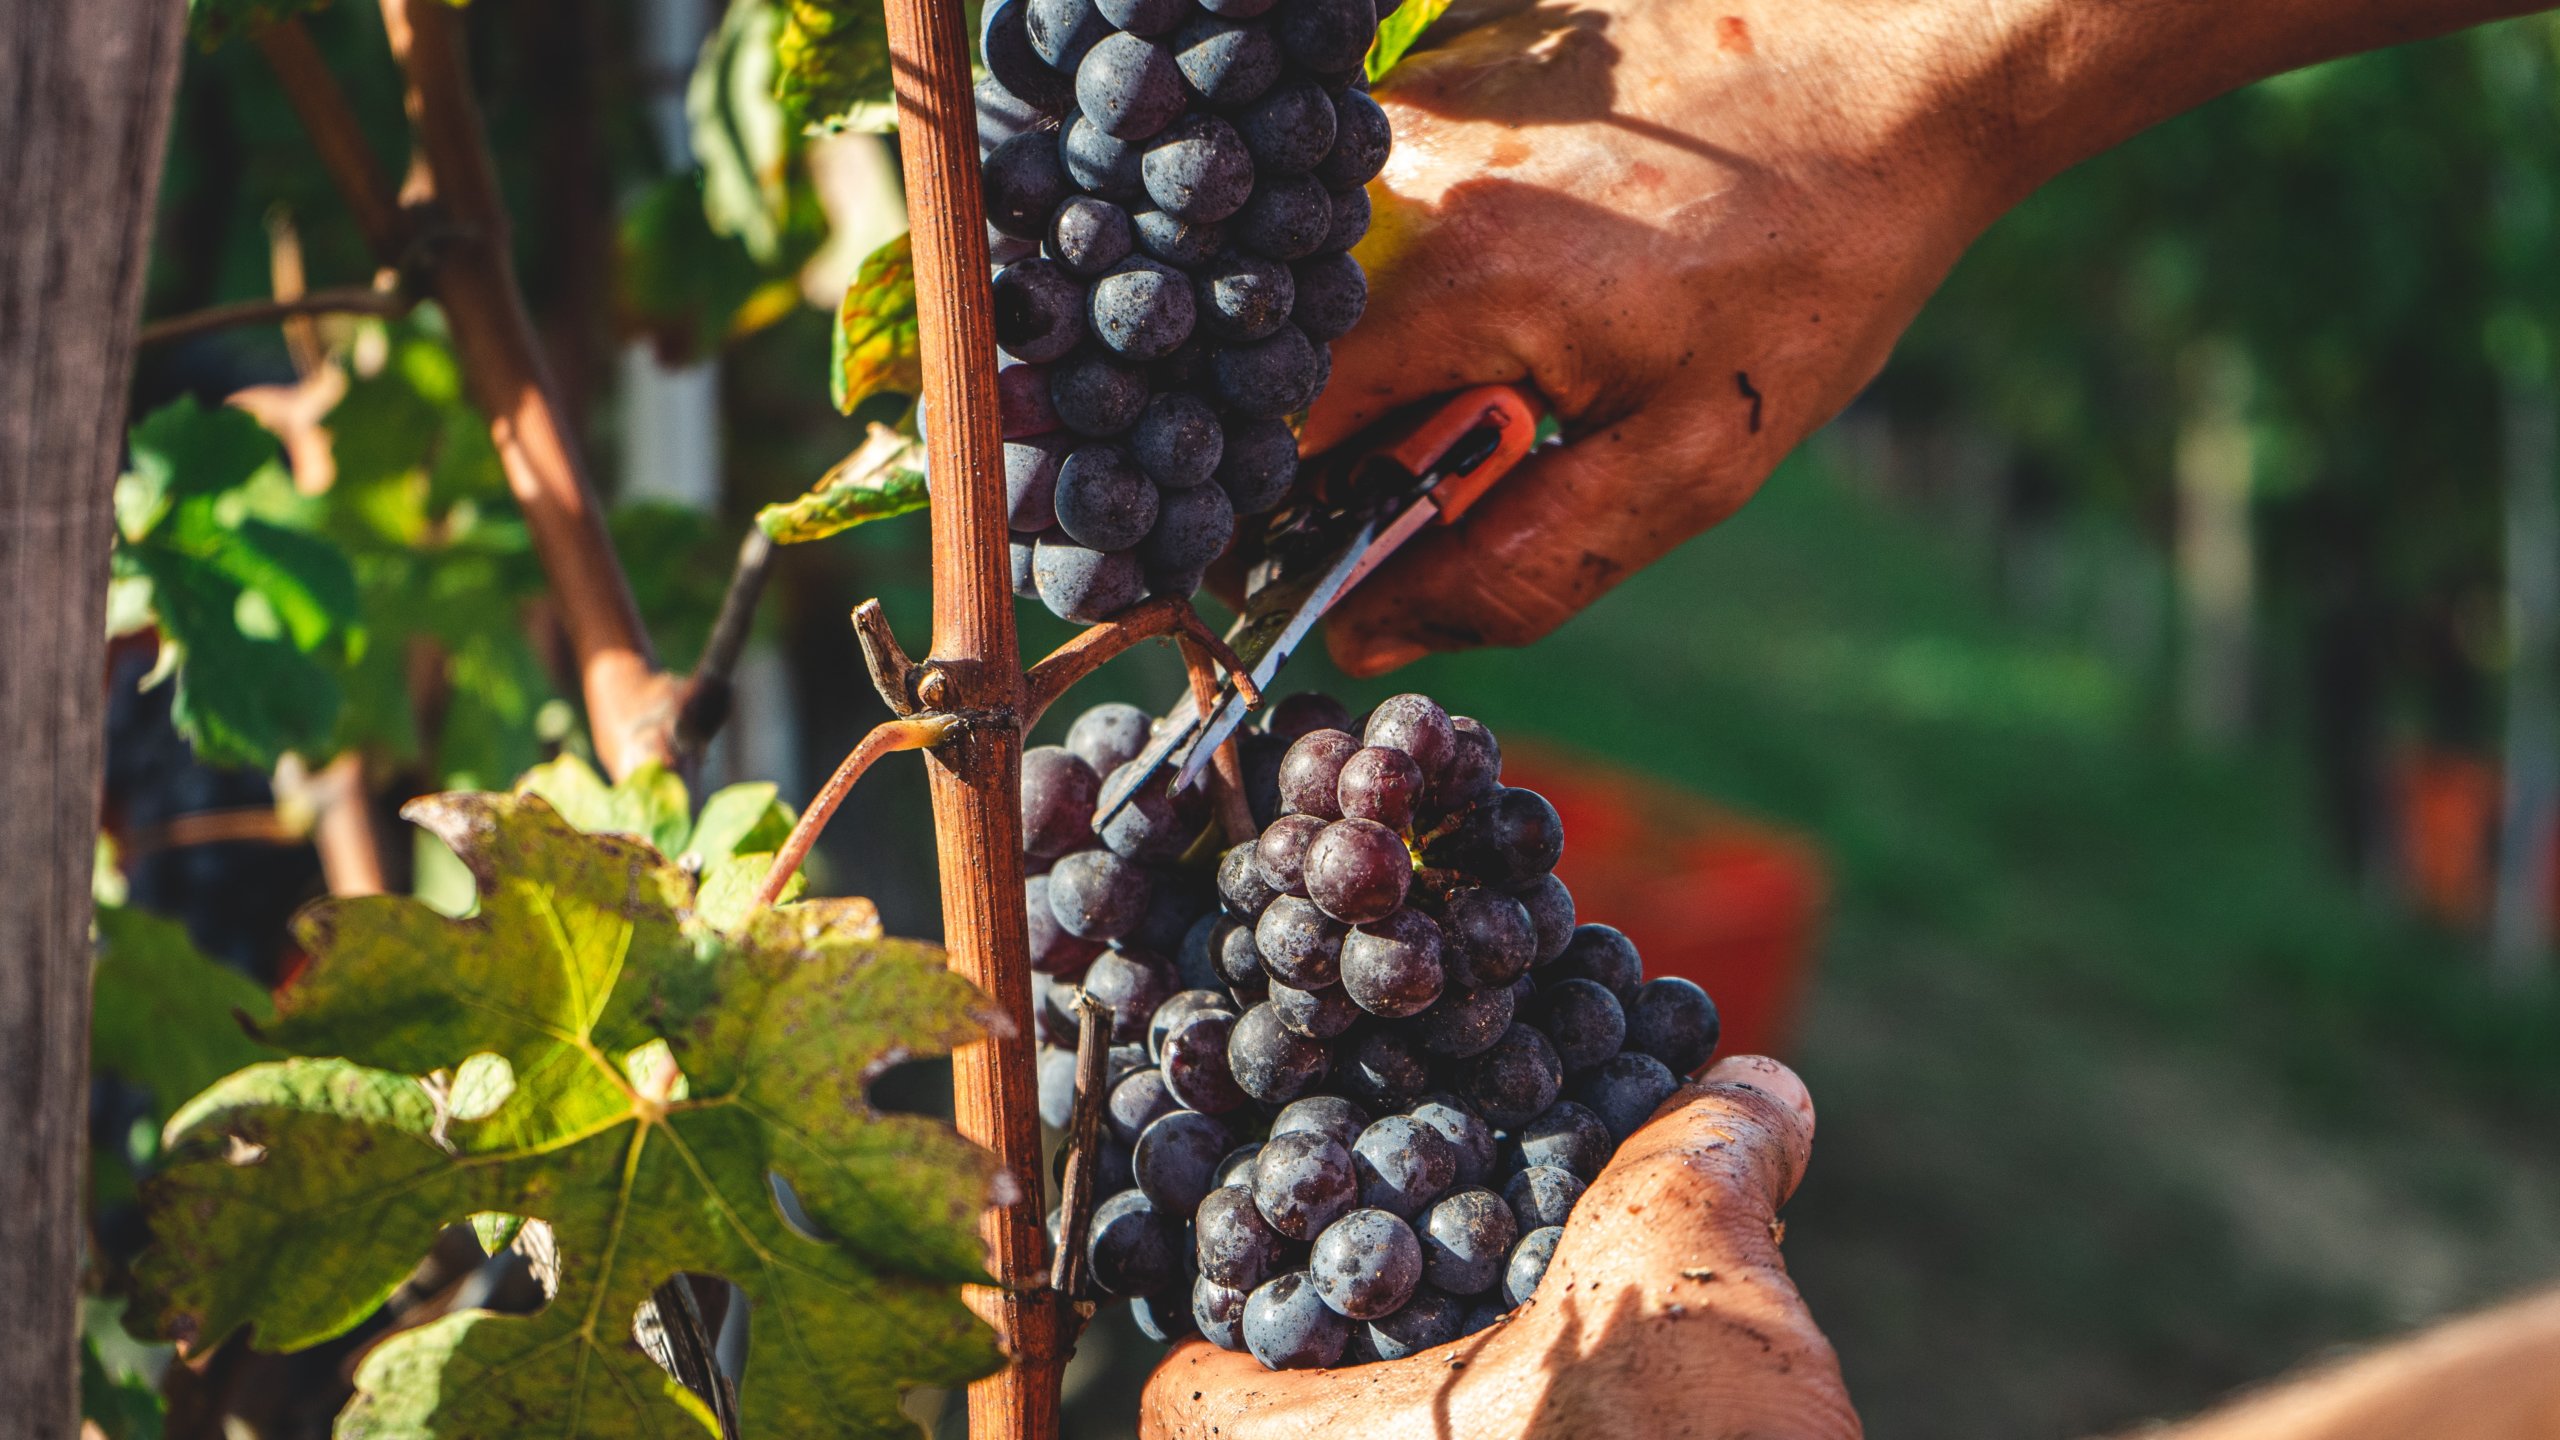 Harvesting Nebbiolo grapes in Serralunga, Italy. Grapes will be used in the process to make Barolo. Photo by Andrea Cairone